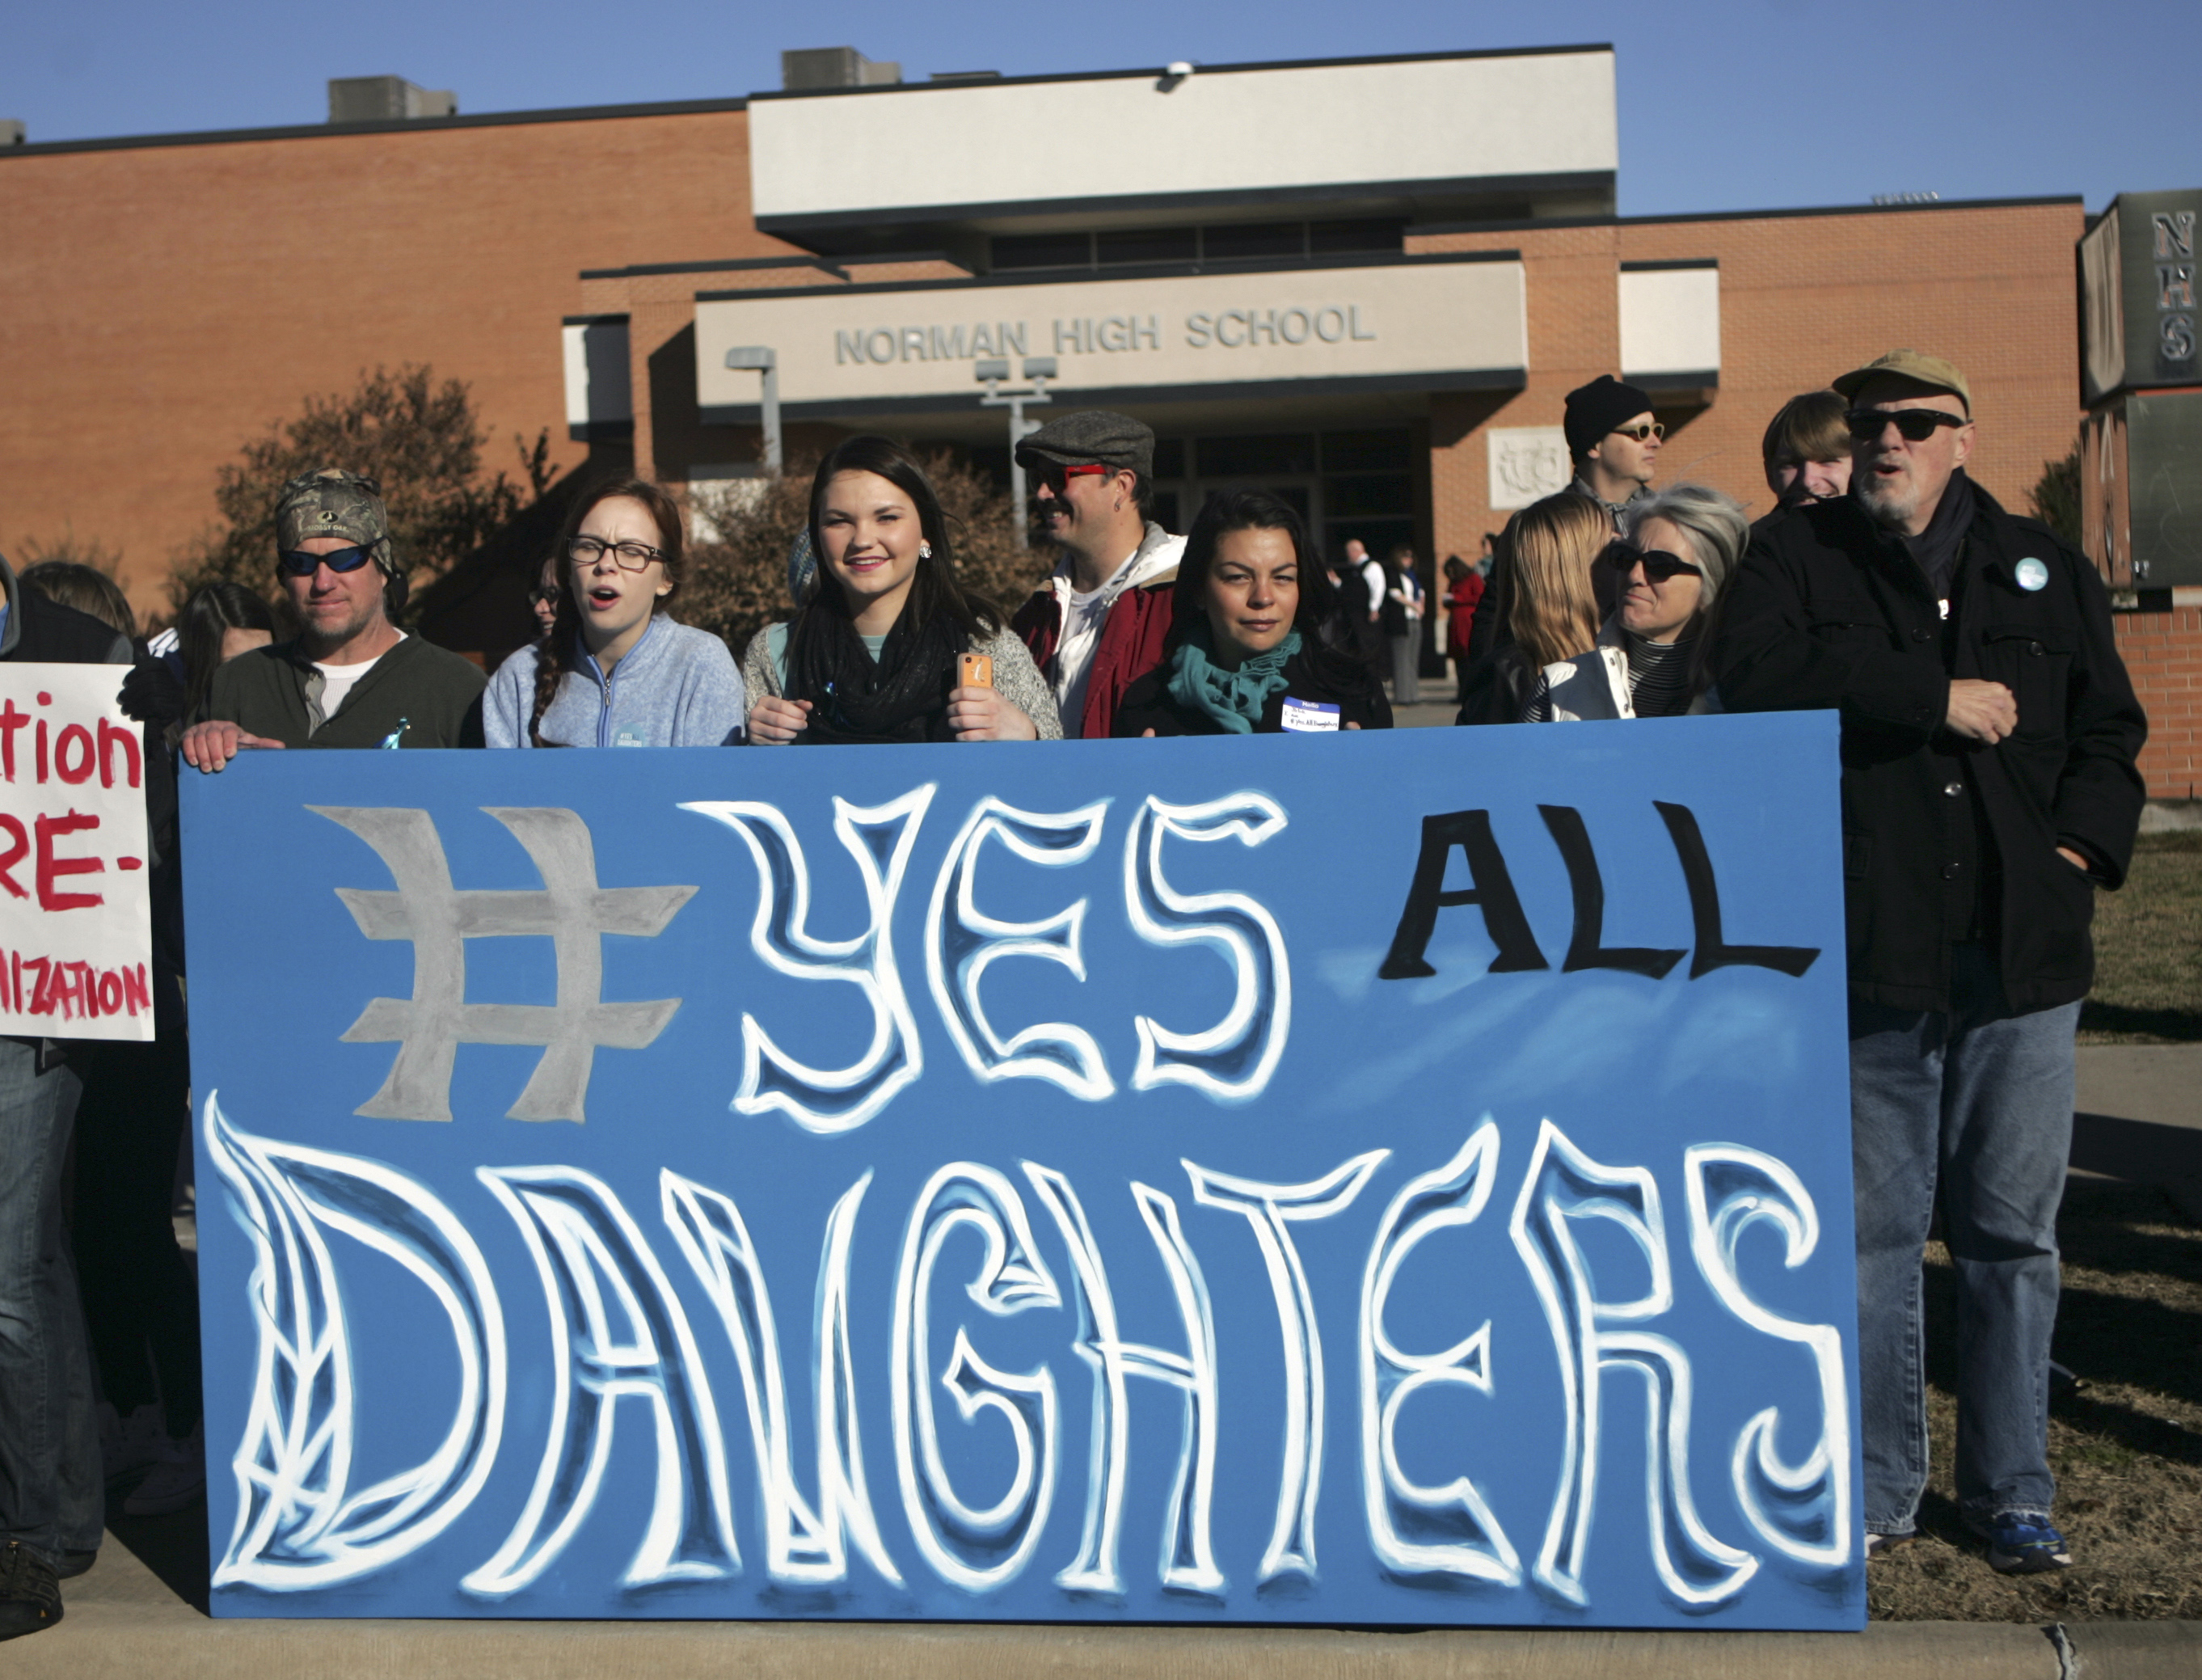 Students and parents holds up a sign during protest outside Norman High School, Monday, Nov. 24, 2014, in Norman, Okla. (Jay Chilton—AP)